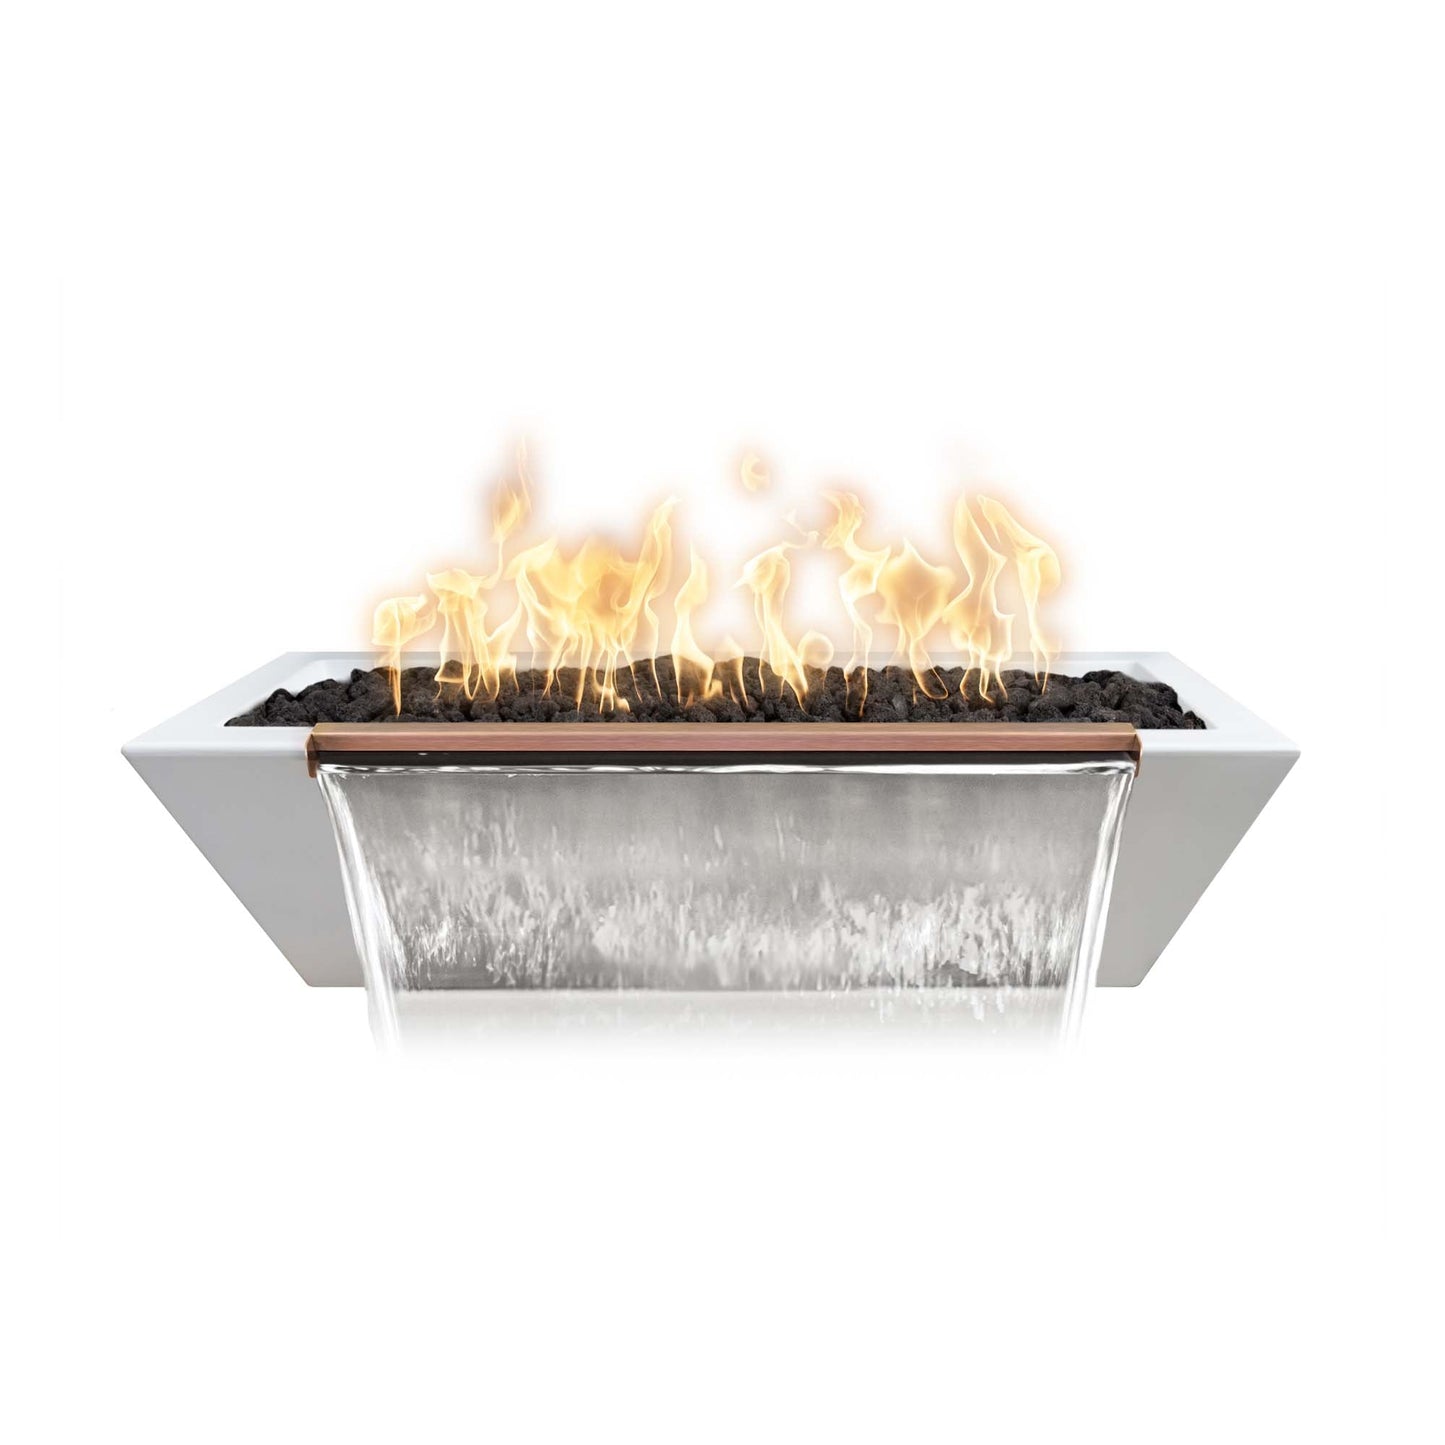 The Outdoor Plus Linear Maya 60" Chocolate GFRC Concrete Liquid Propane Fire & Water Bowl with Match Lit with Flame Sense Ignition